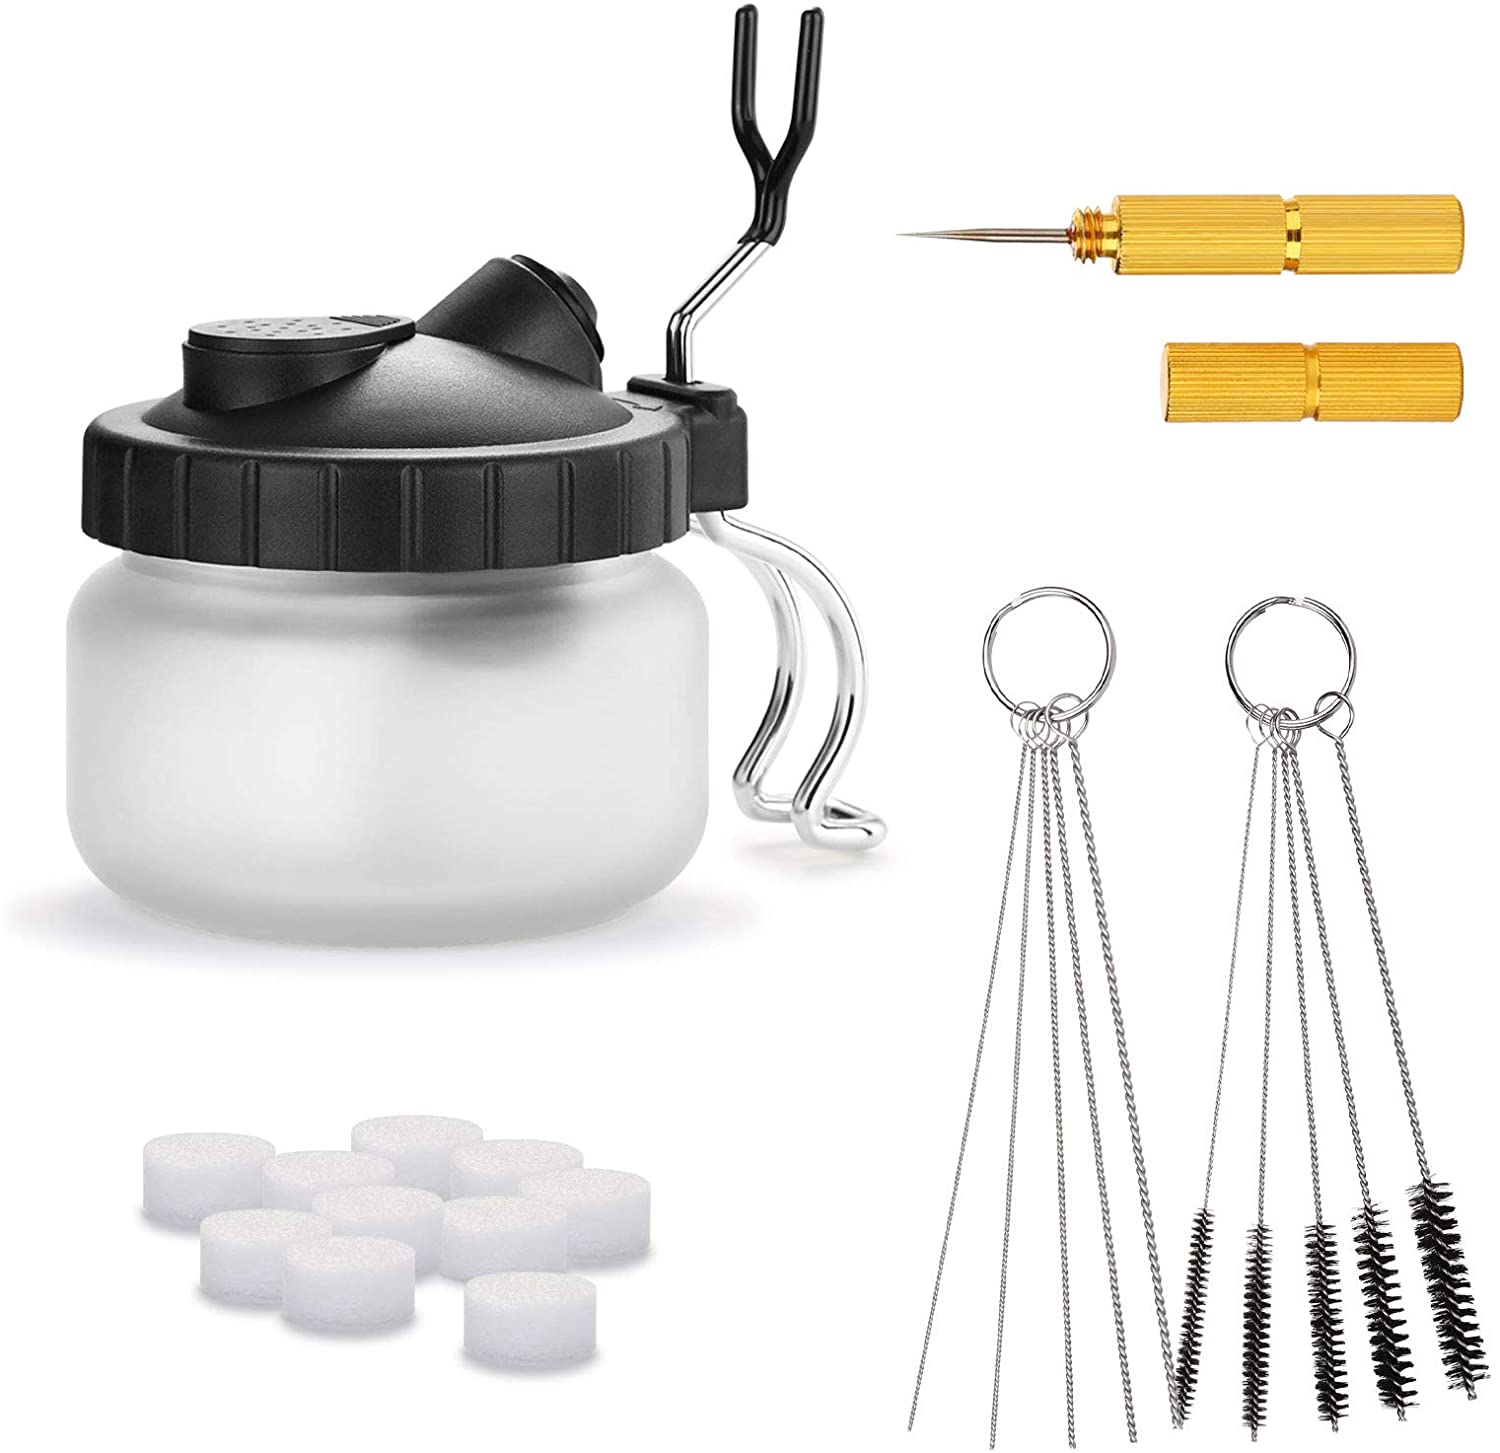 Airbrush Cleaning Kit, Glass Airbrush Cleaning Pot with Cleaning Needle,  Airbrush Filters, Scraper Needle, Cleaning Needle and Tube Brushes